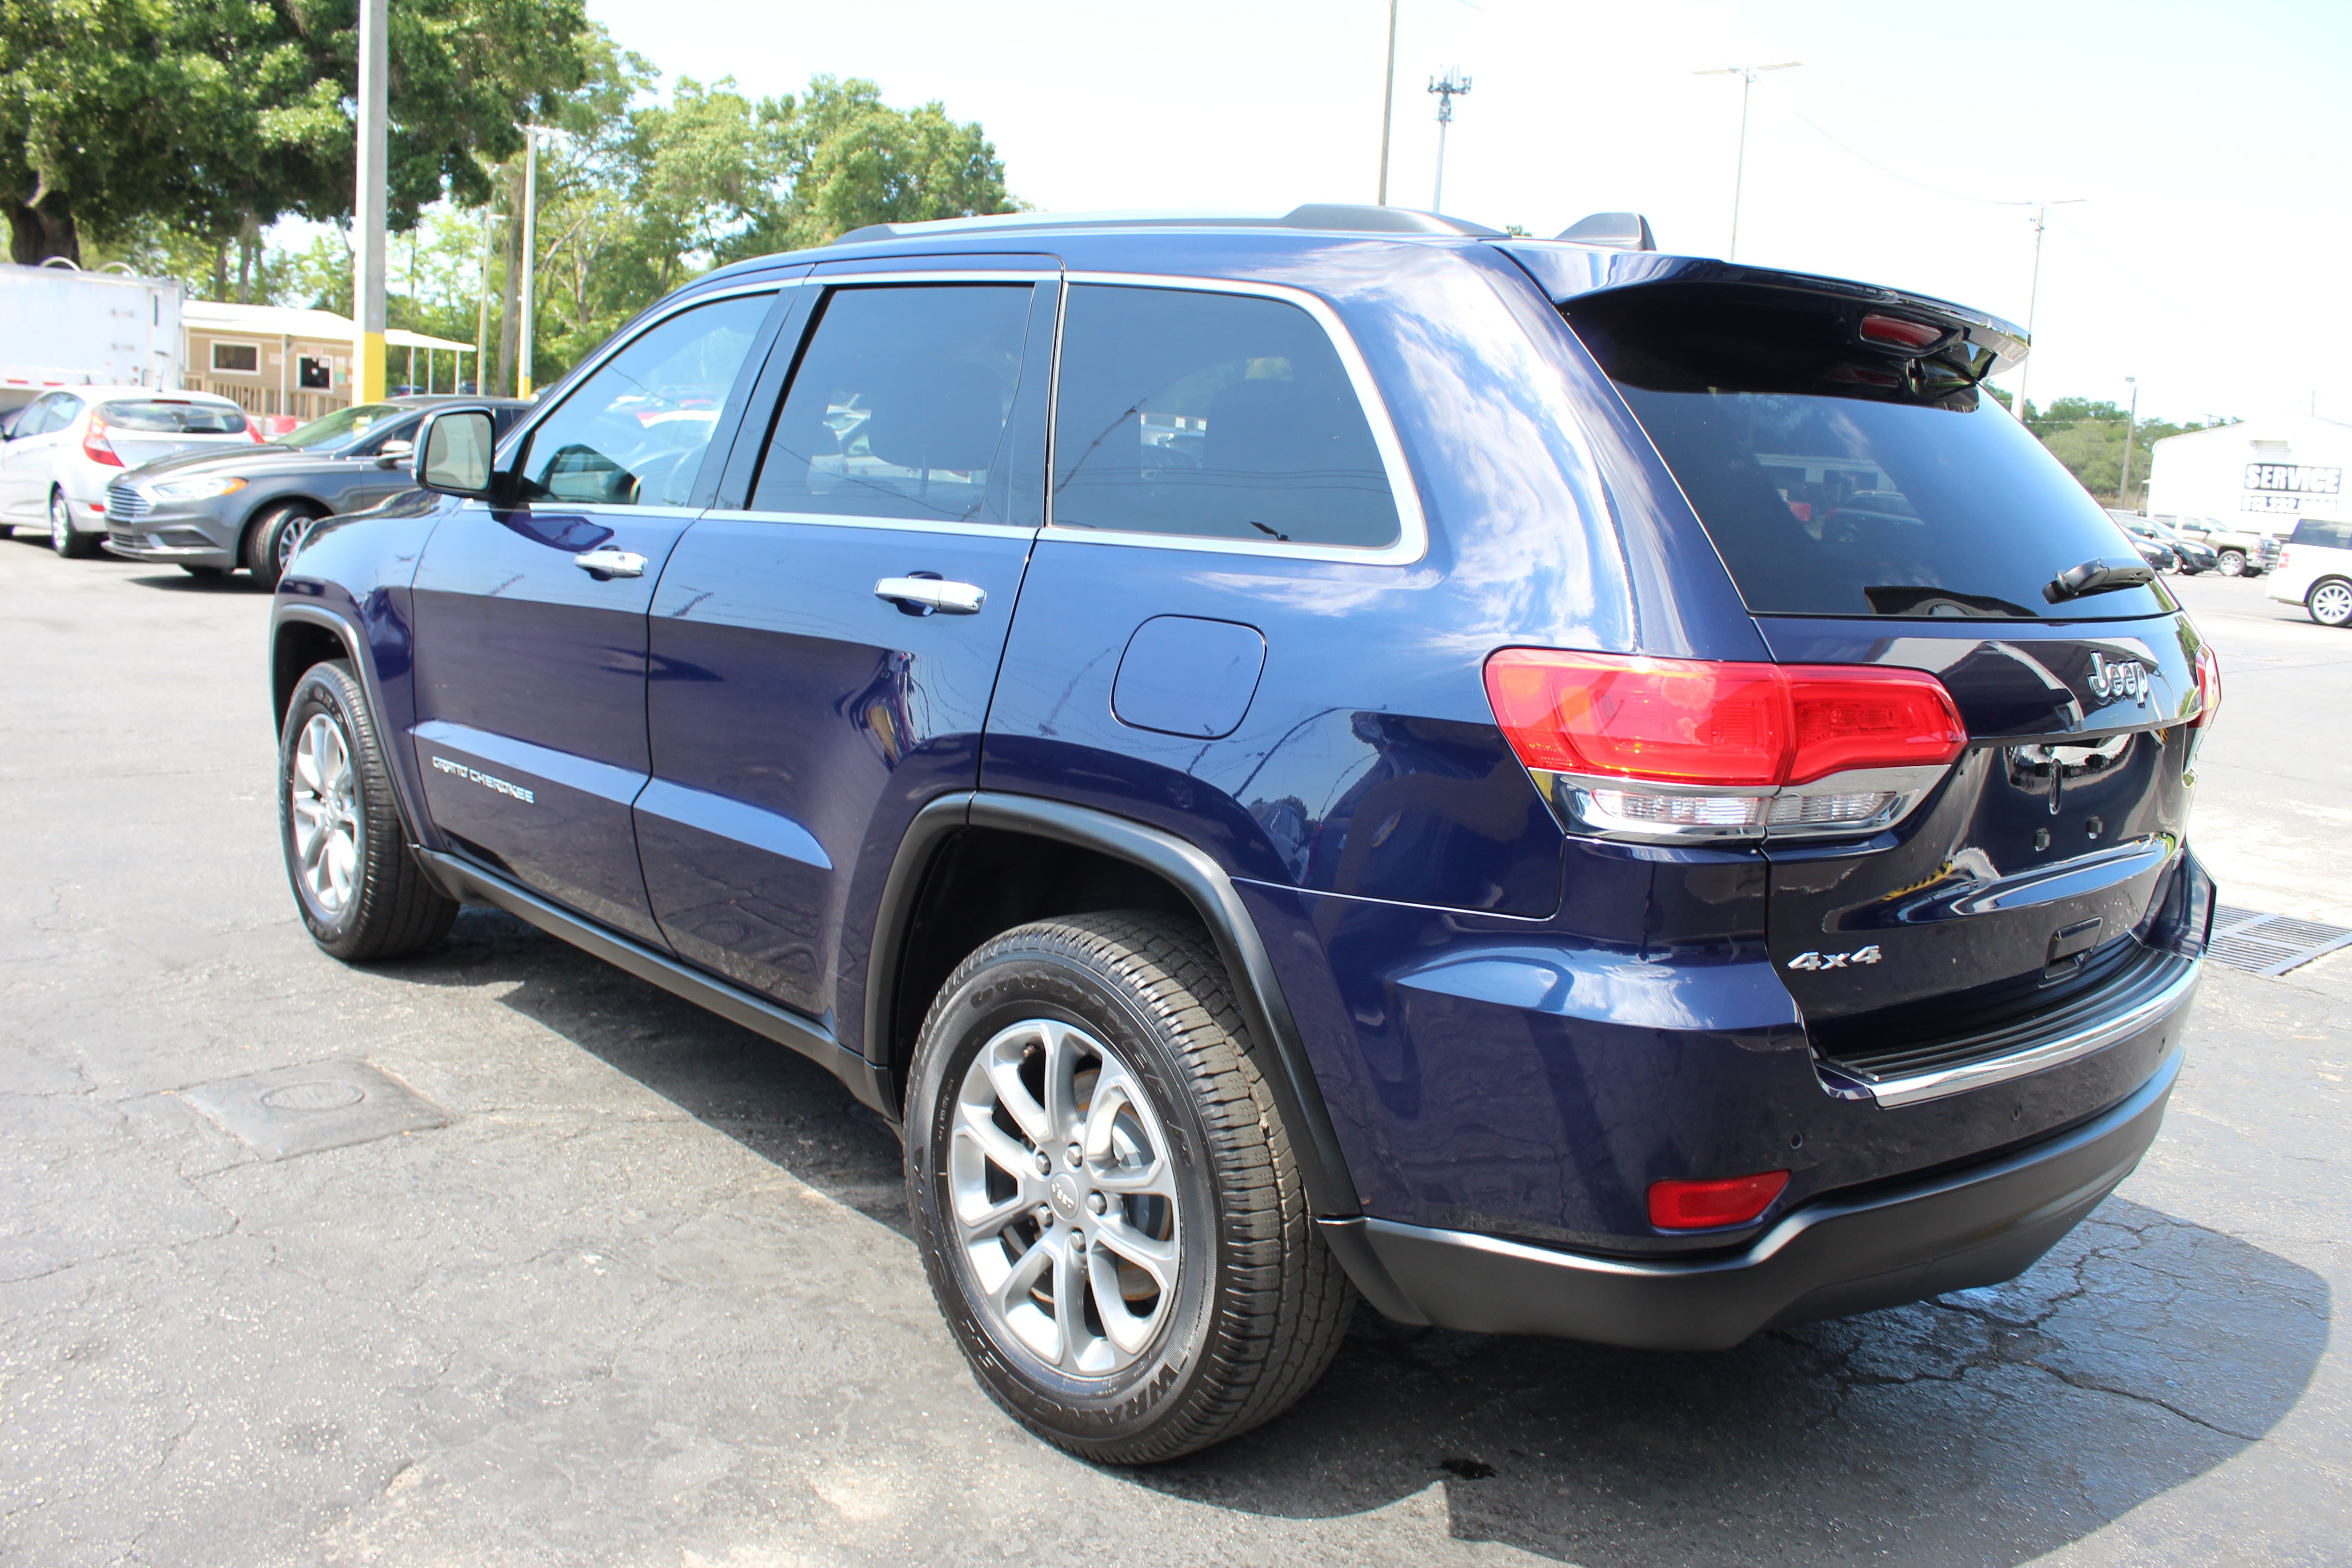 PreOwned 2015 Jeep Grand Cherokee Limited Wagon 4 Dr. in